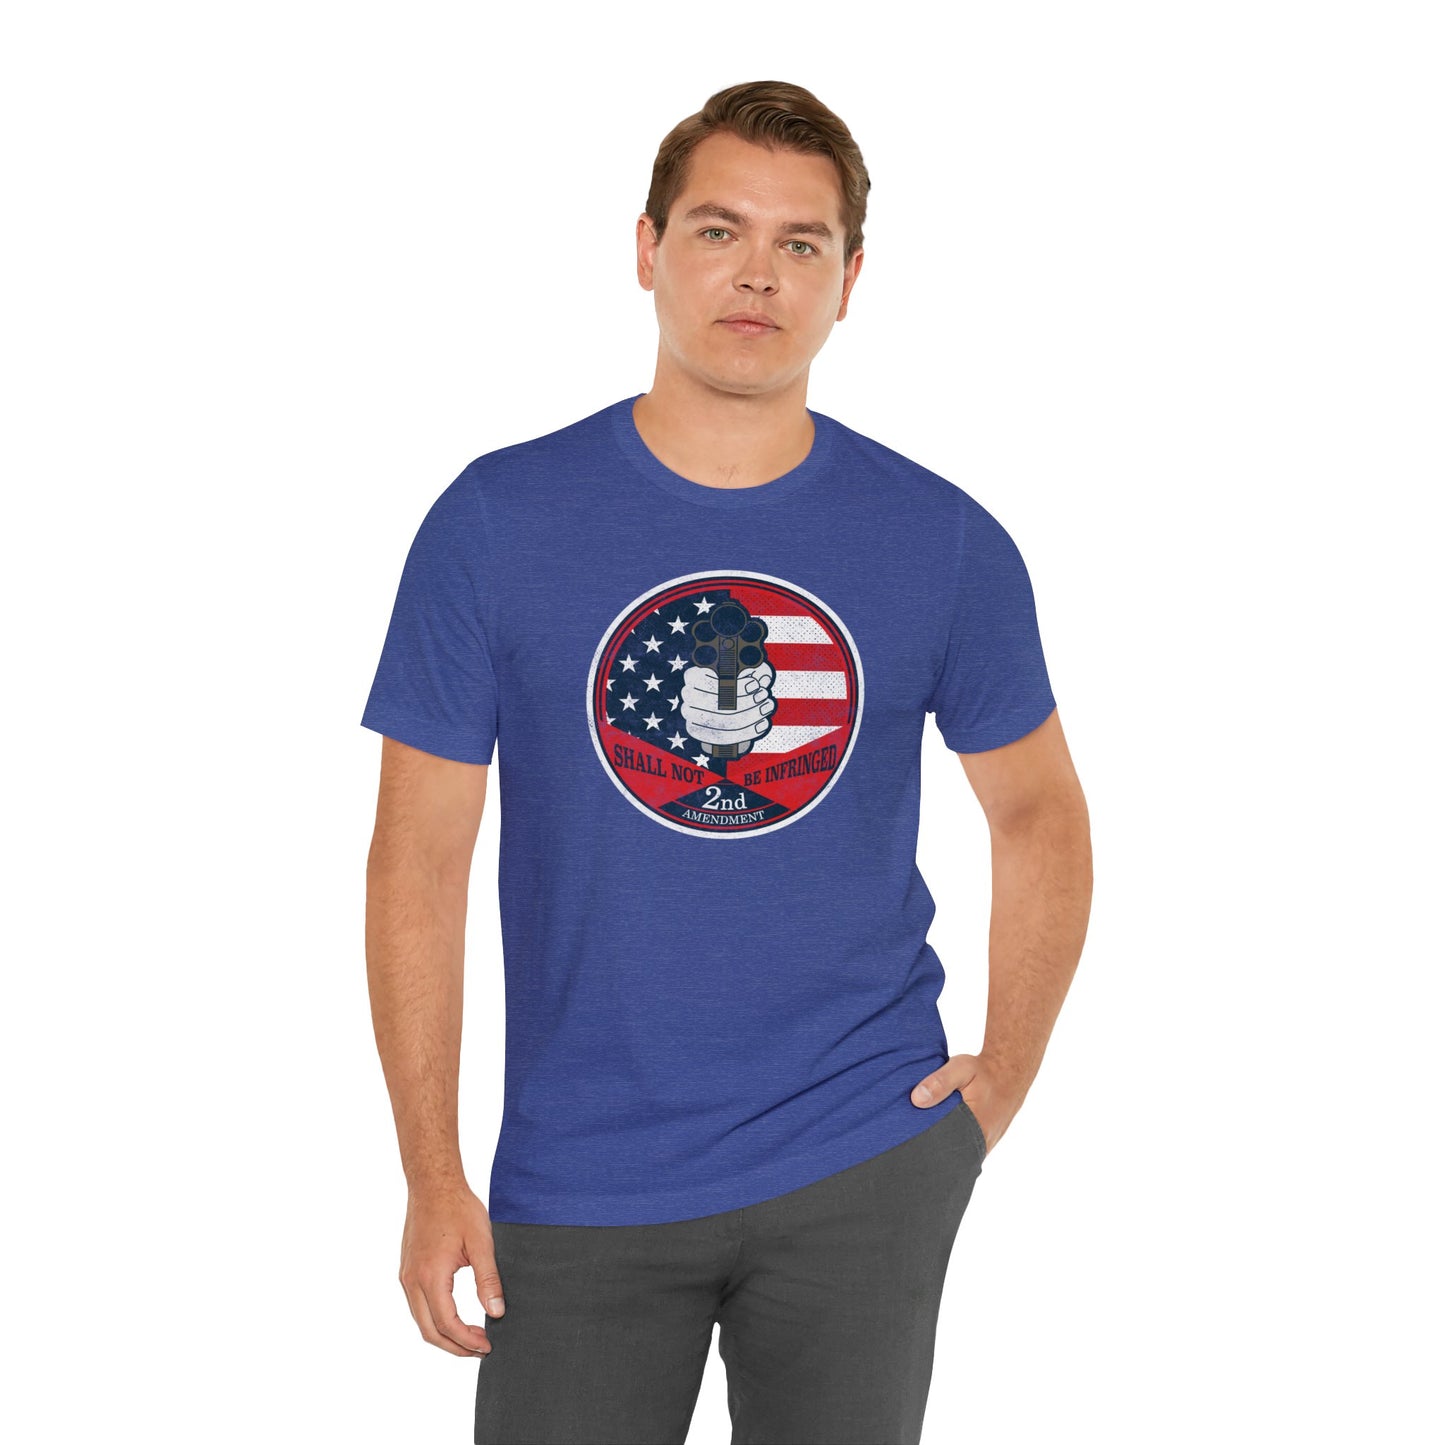 Shall Not Be Infringed T-Shirt